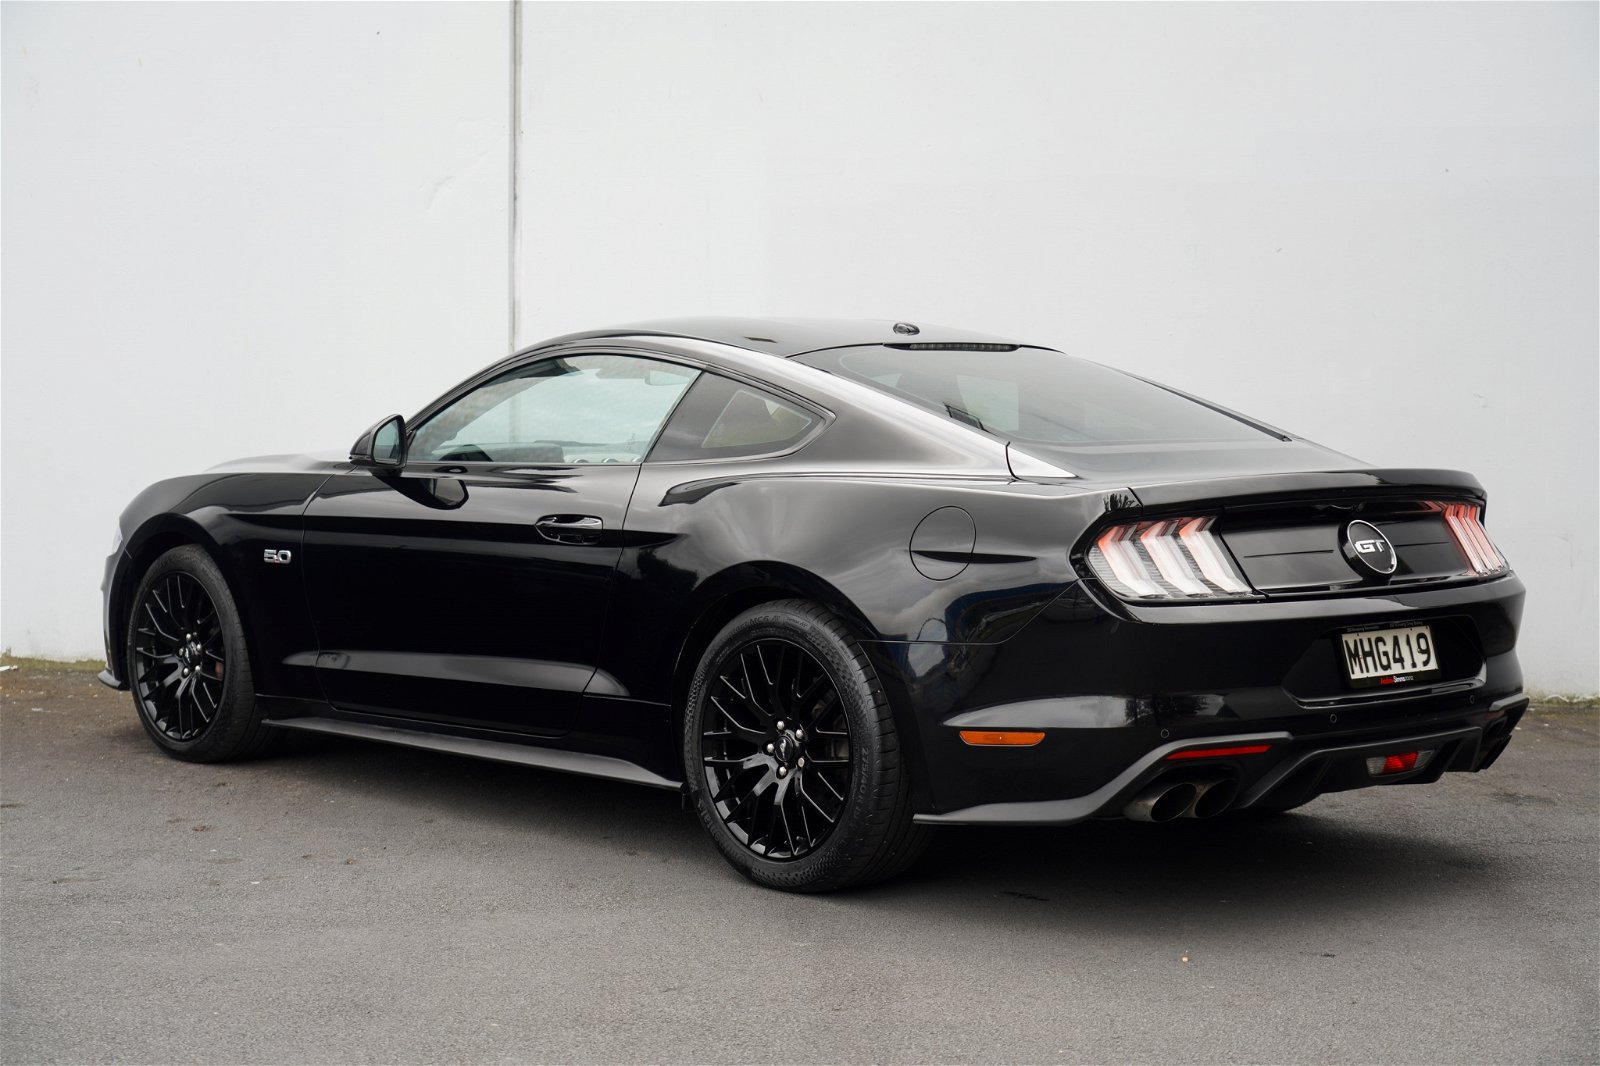 2019 Ford Mustang 5.0L Fastback At 5.0